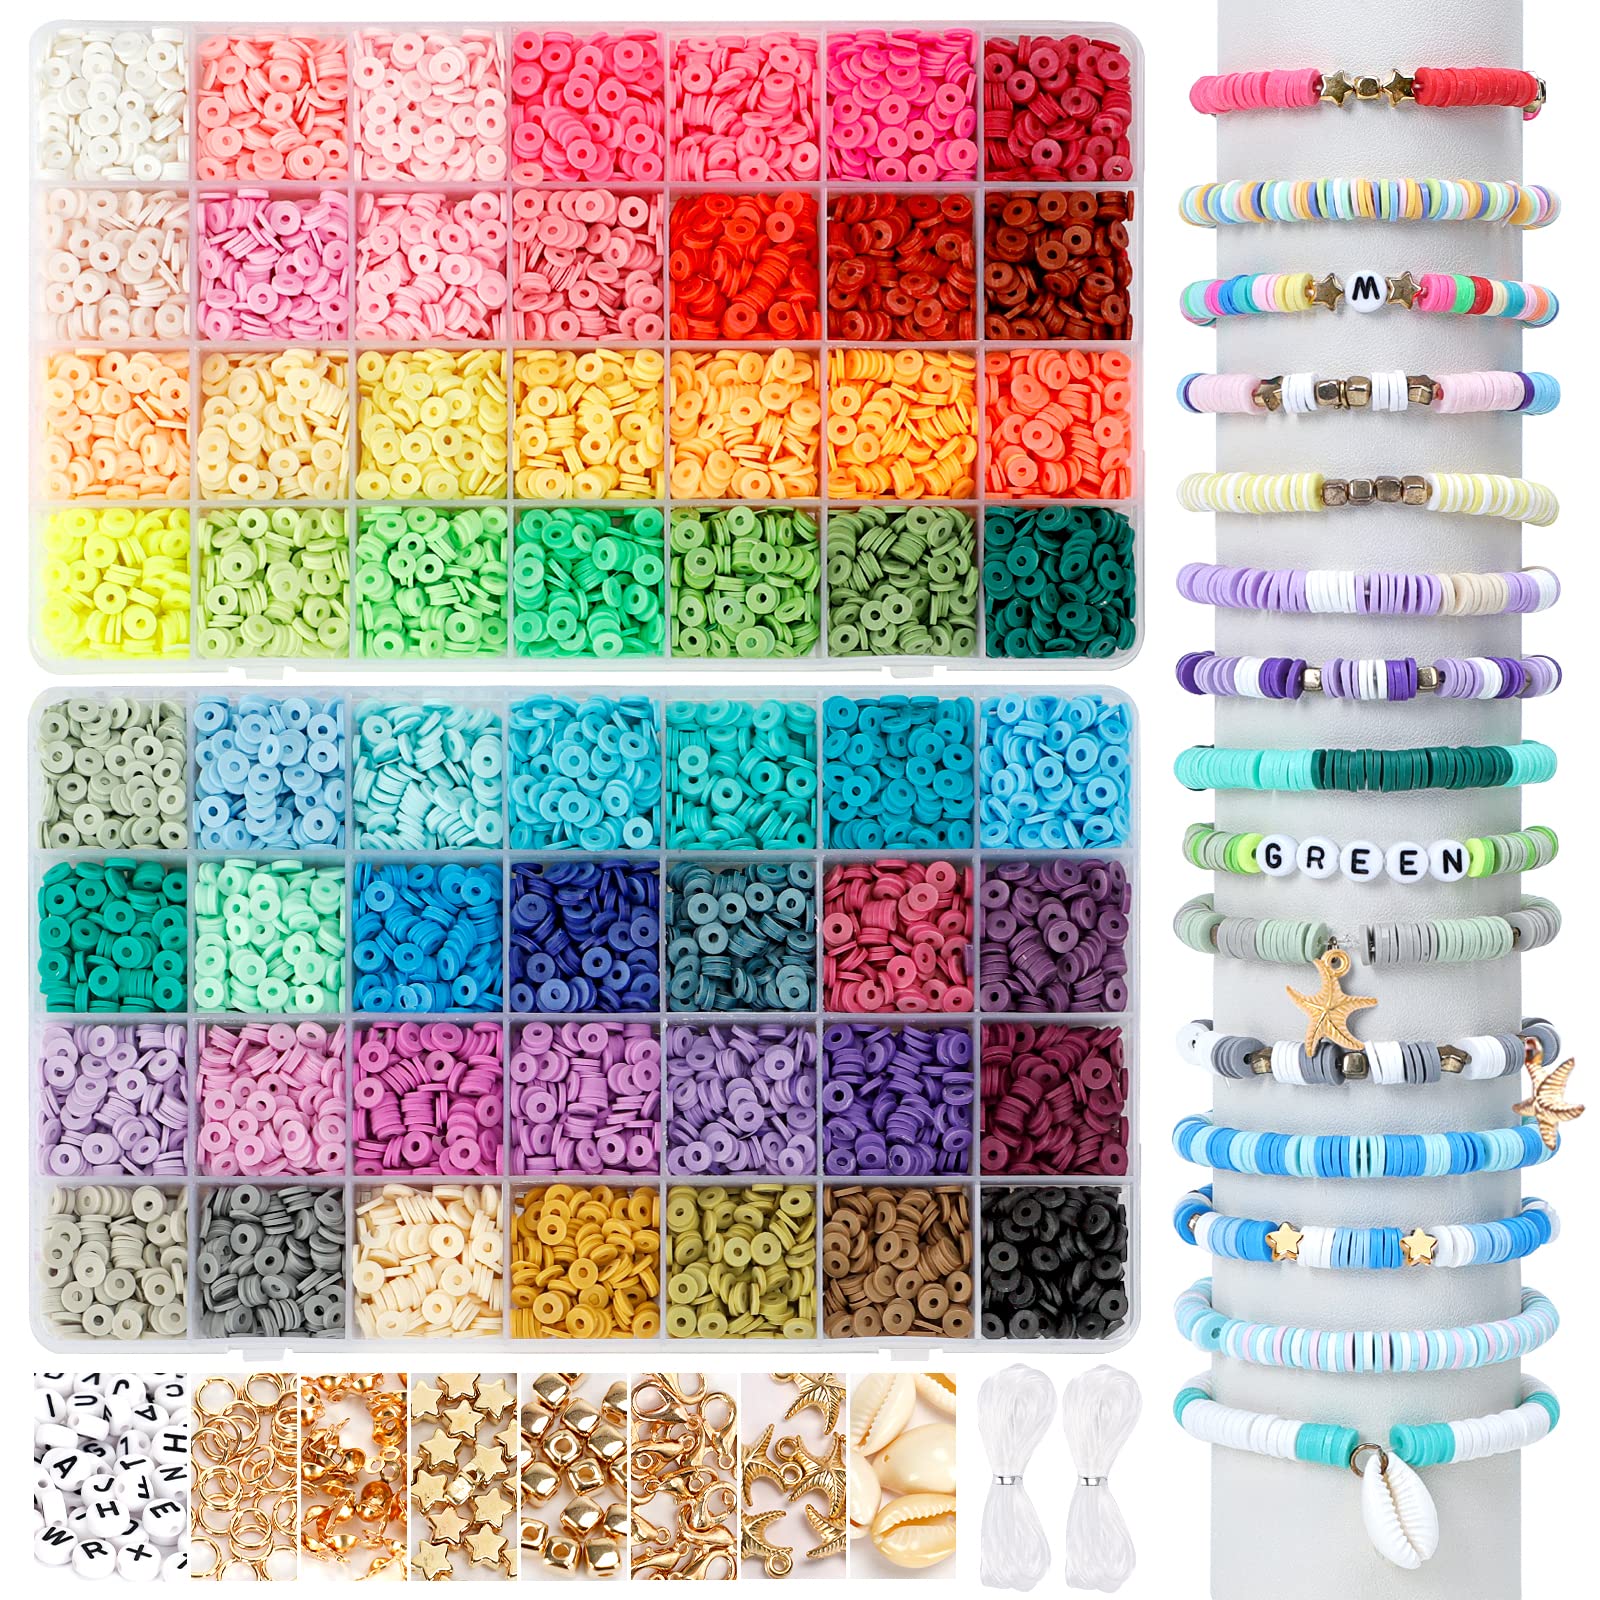 QUEFE 14420pcs Clay Beads for Bracelet Making Kit, 56 Colors Spacer Heishi  Beads Flat Round Polymer Clay Beads with Pendant Charms Kits and Elastic  Strings